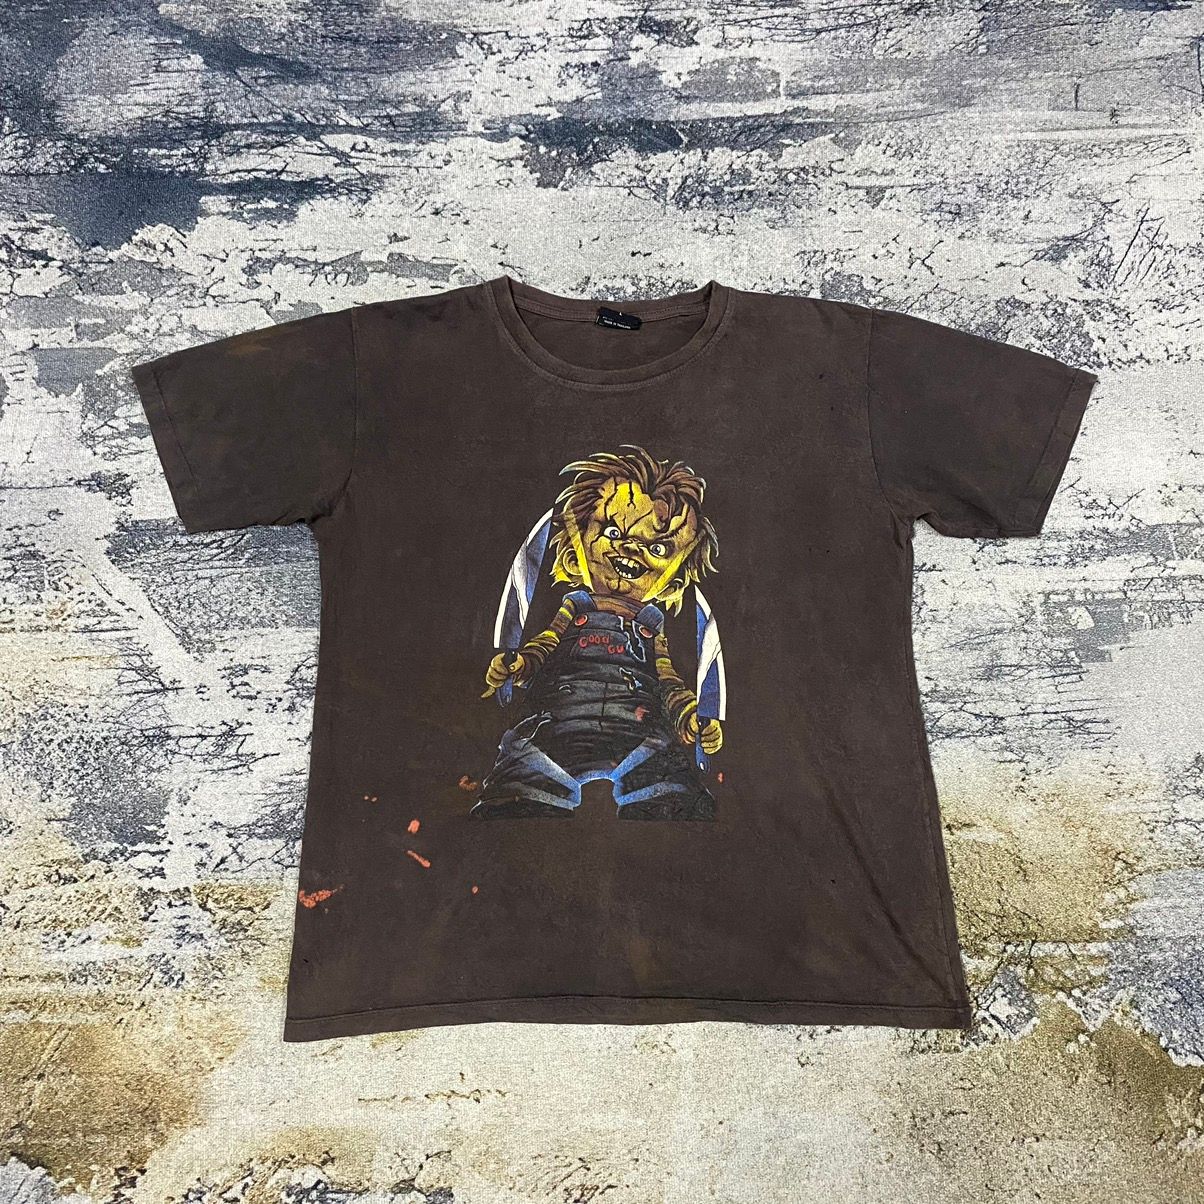 Vintage Vintage 90 Movie Chucky Killer Doll Faded Tee Size US M / EU 48-50 / 2 - 1 Preview